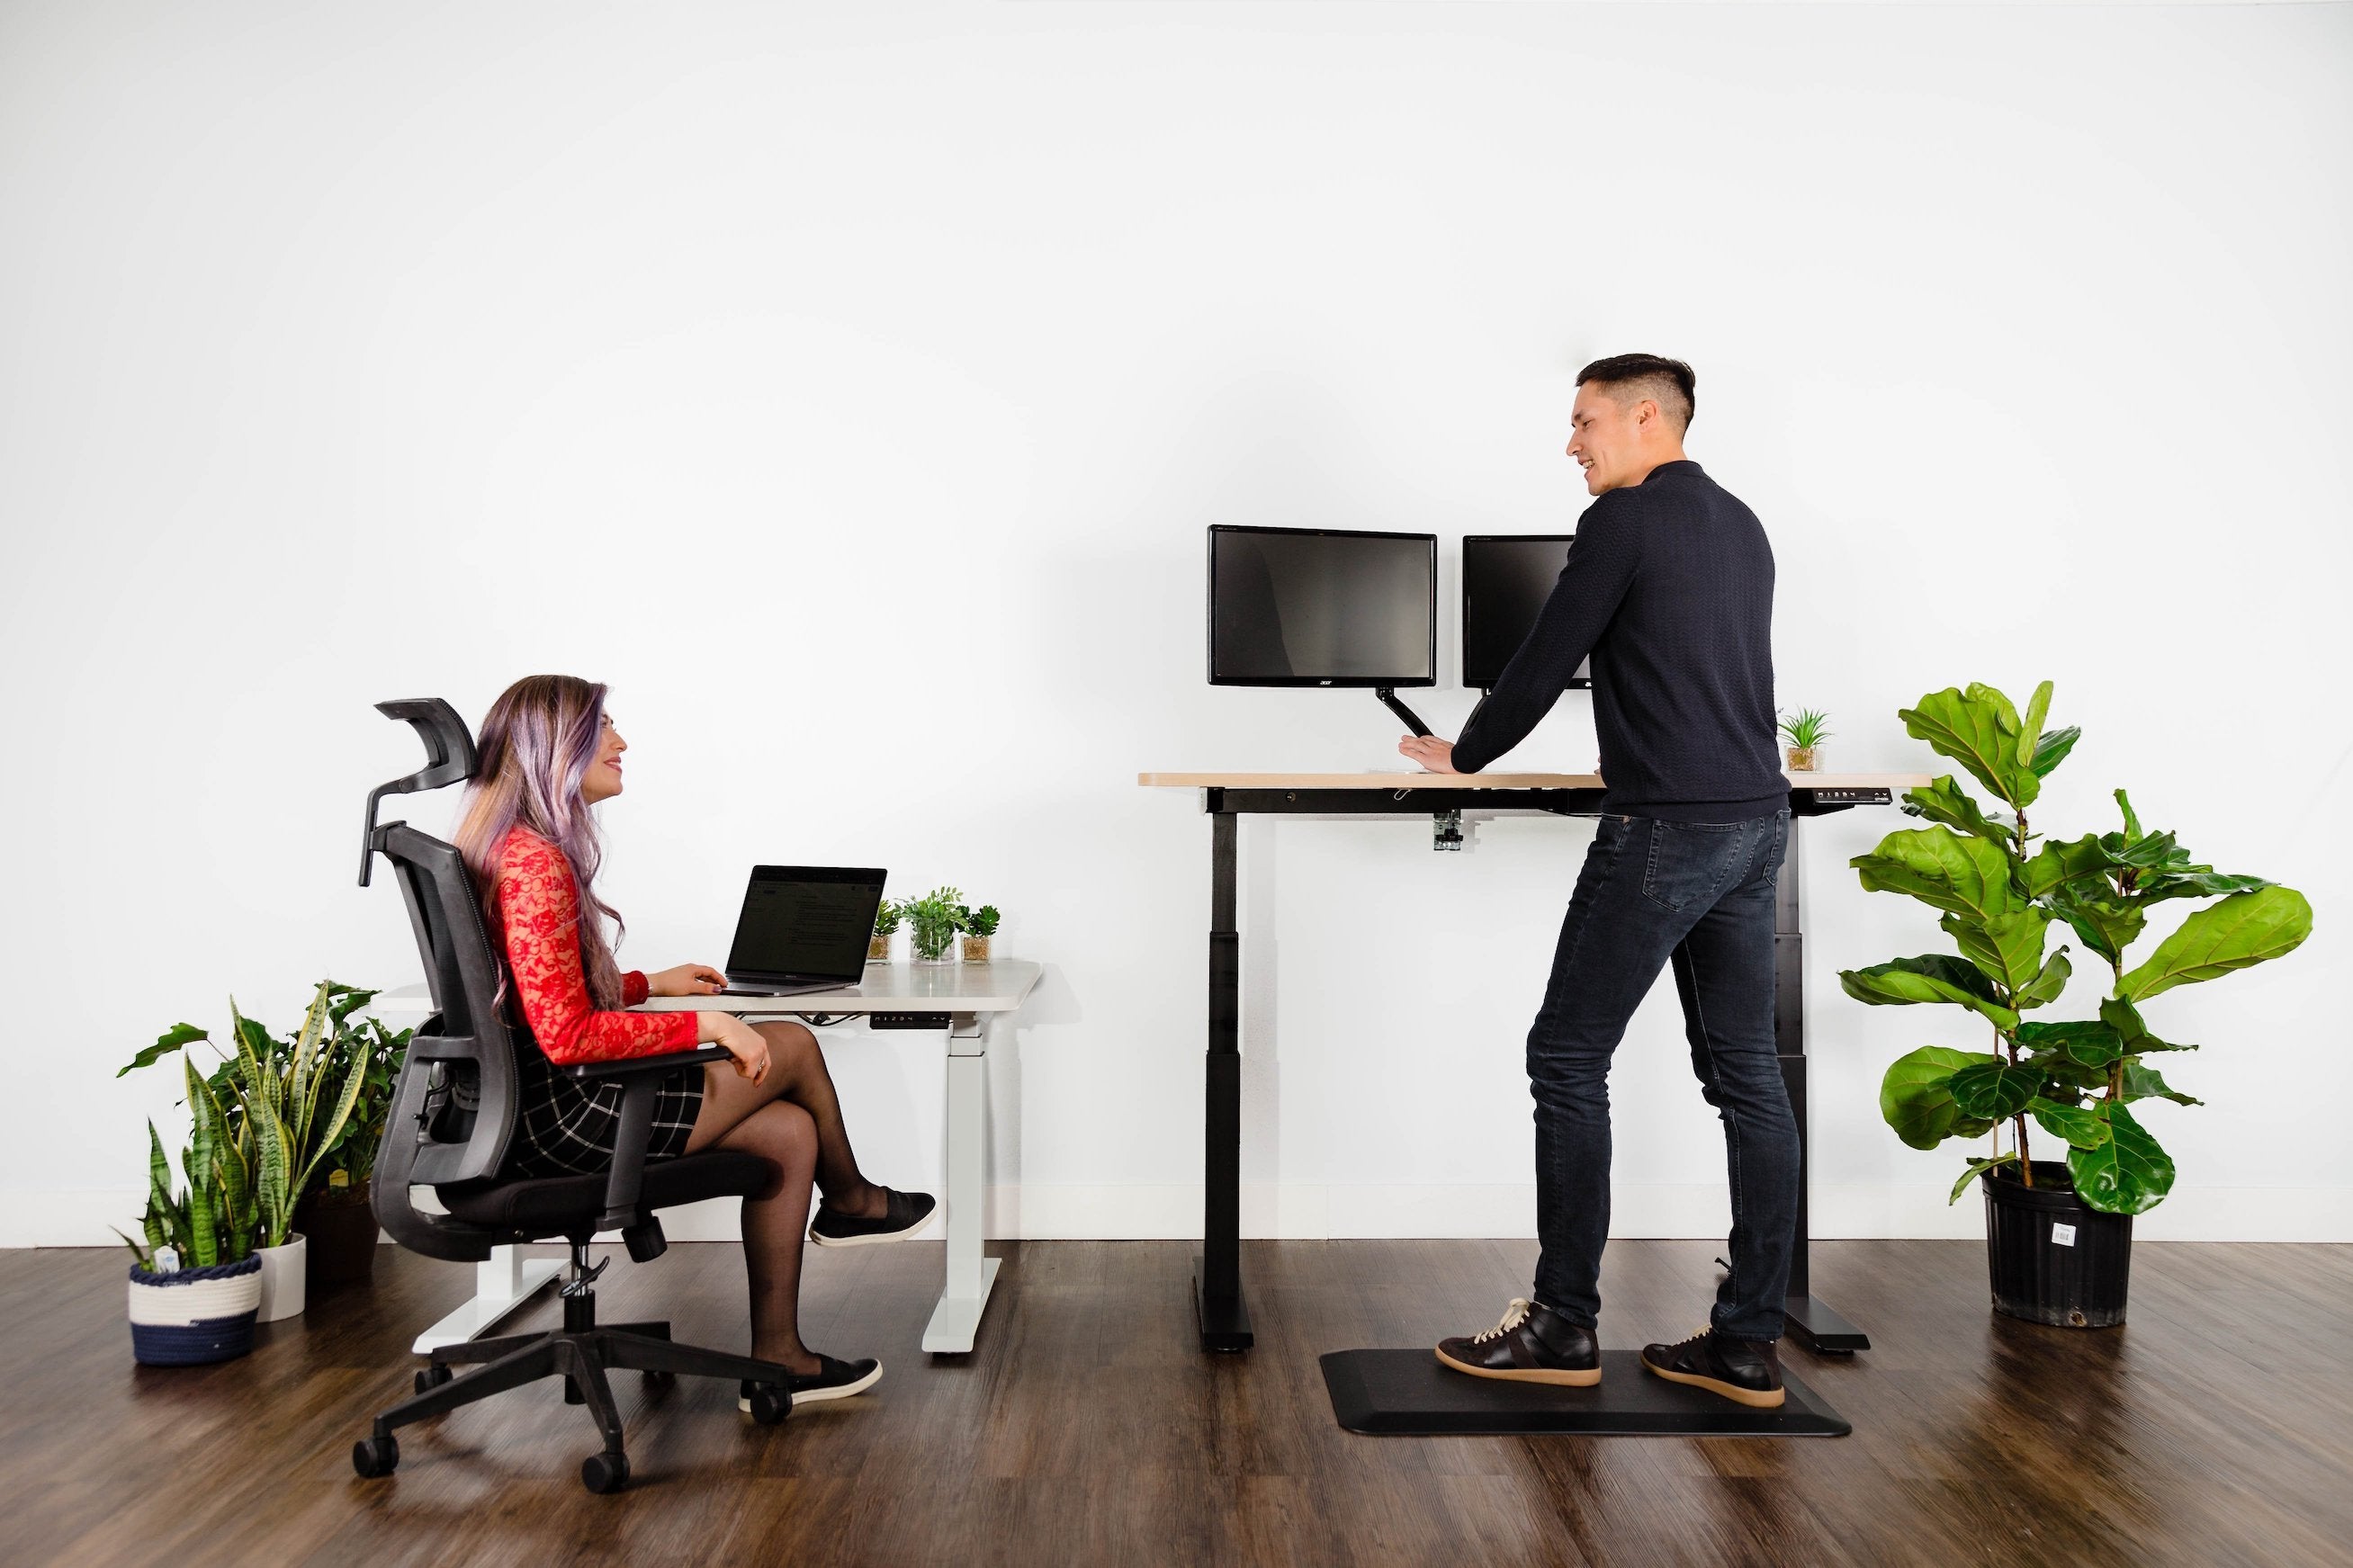 Effydesk in use at an office, one sitting and working employee, one standing and working employee